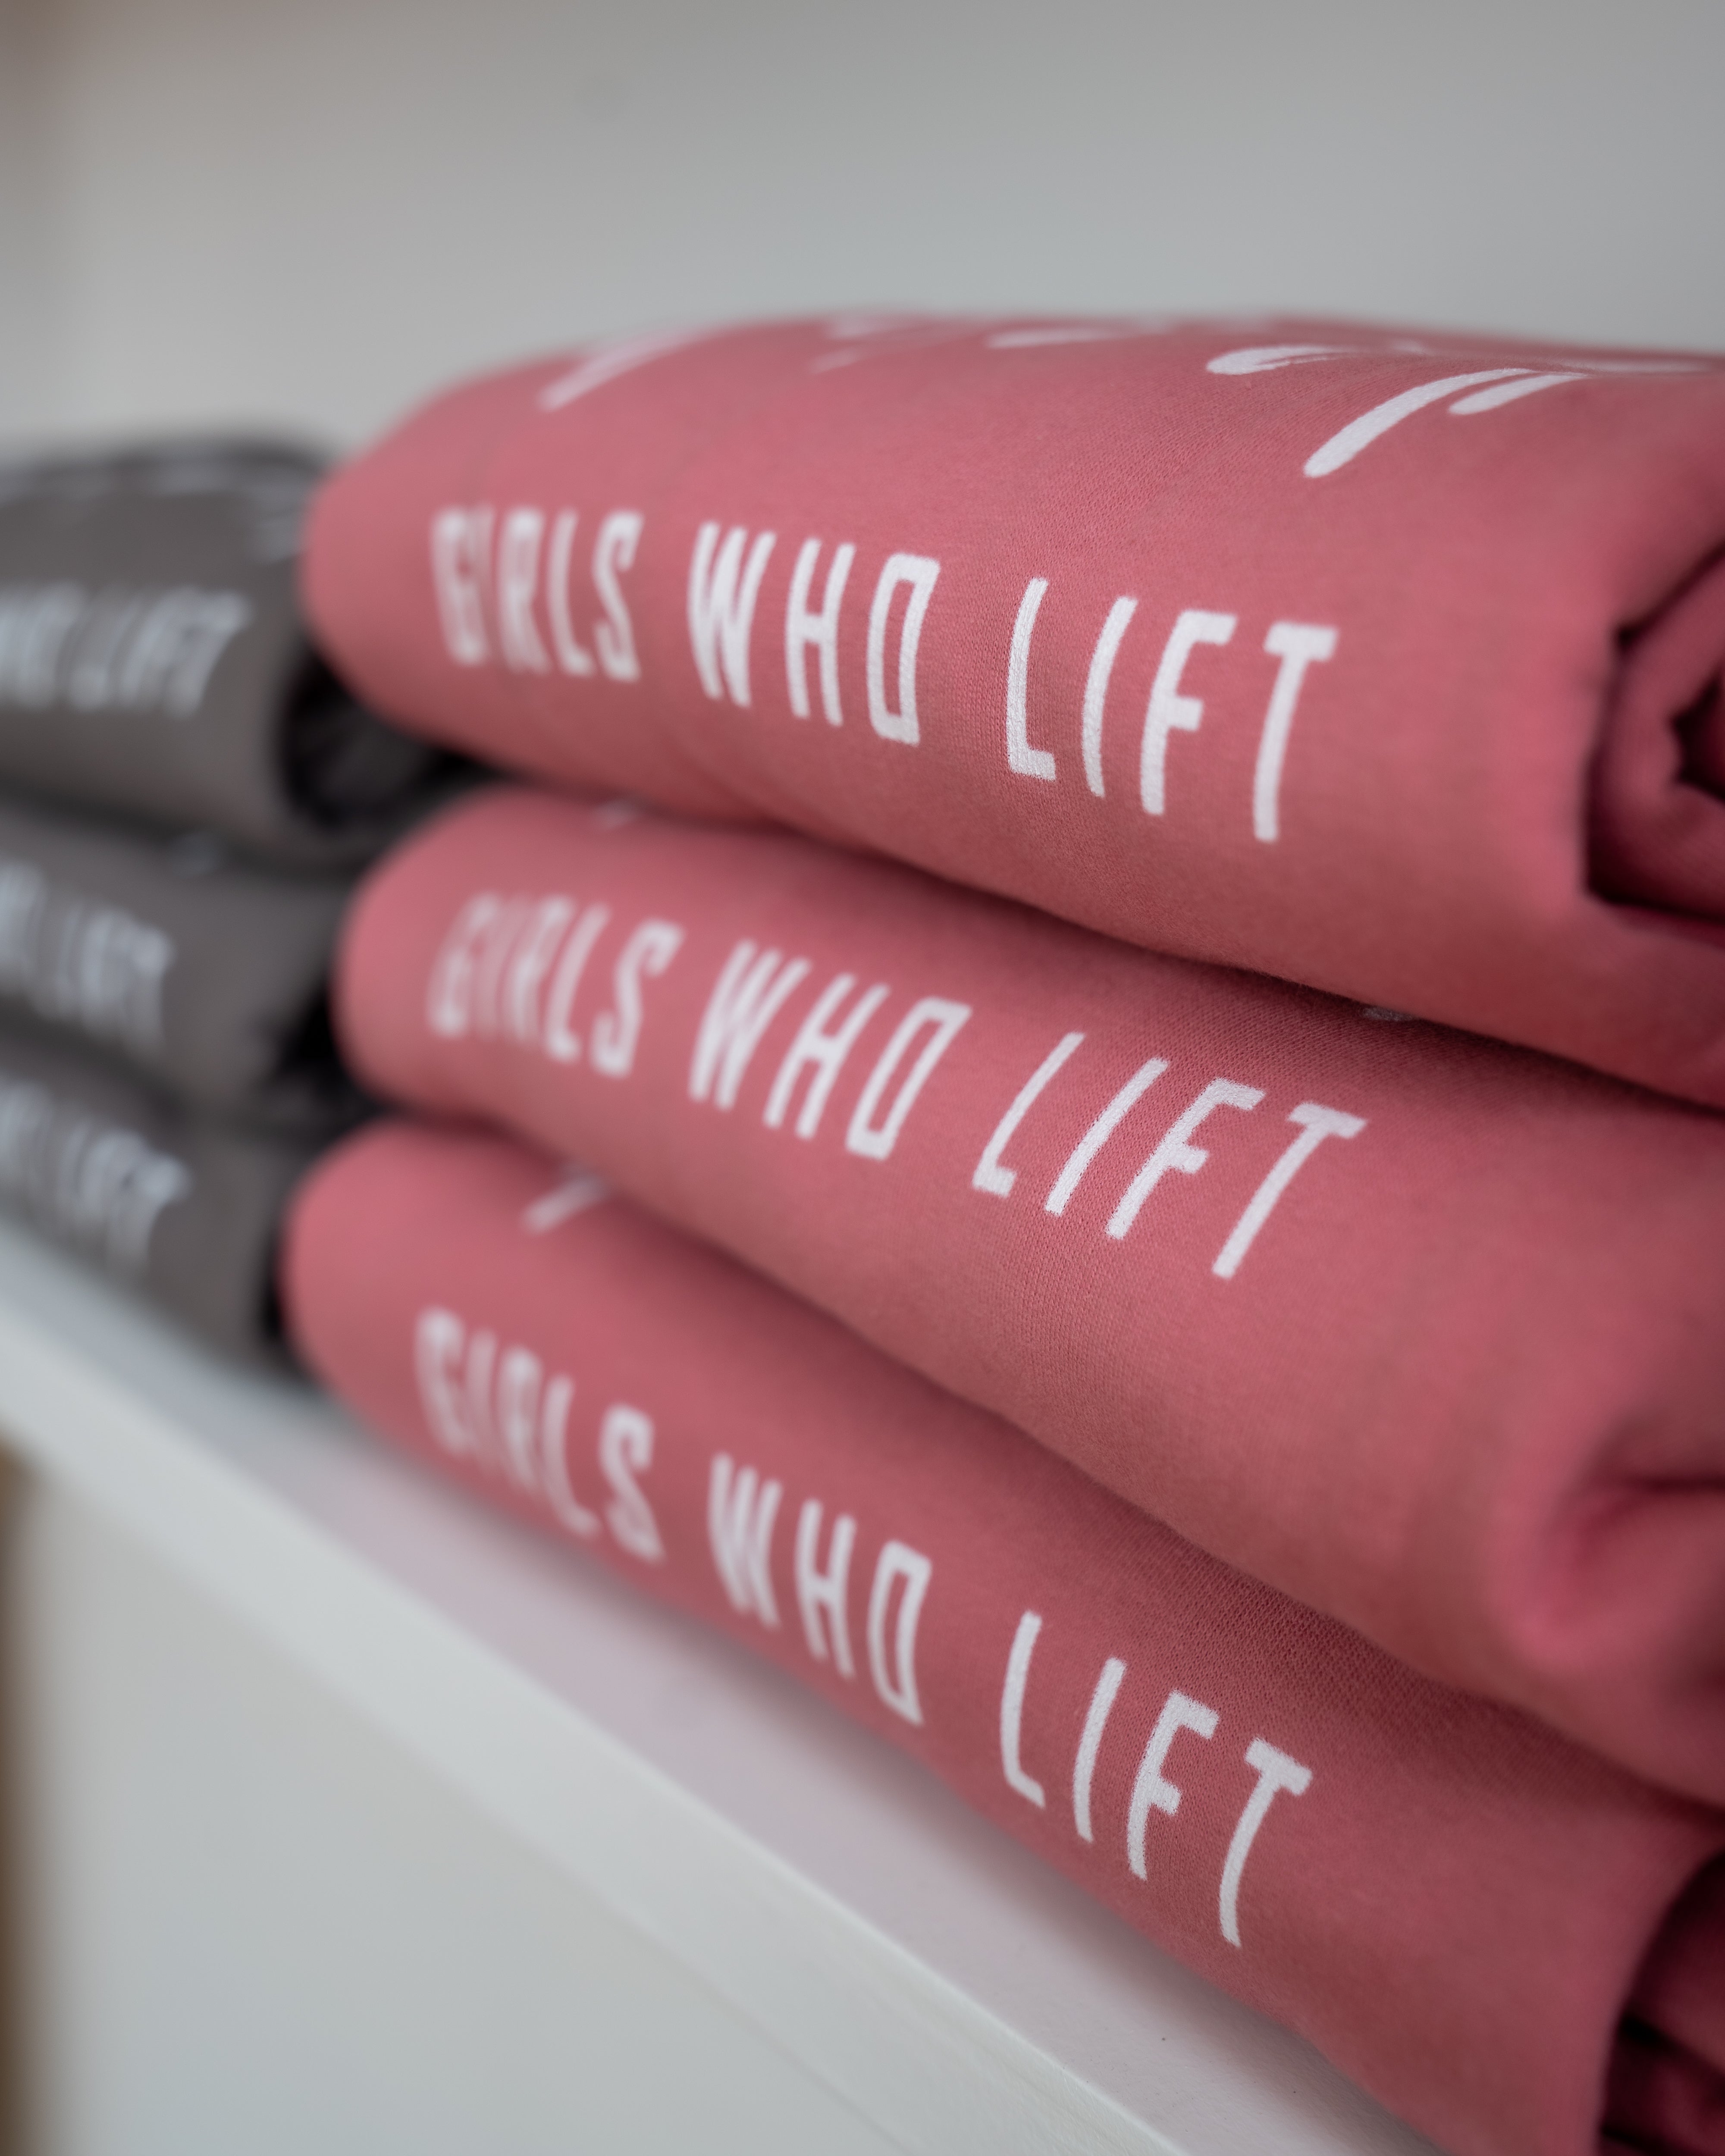 Girls Who Lift sweatshirts close up - dusty rose pink and steel grey